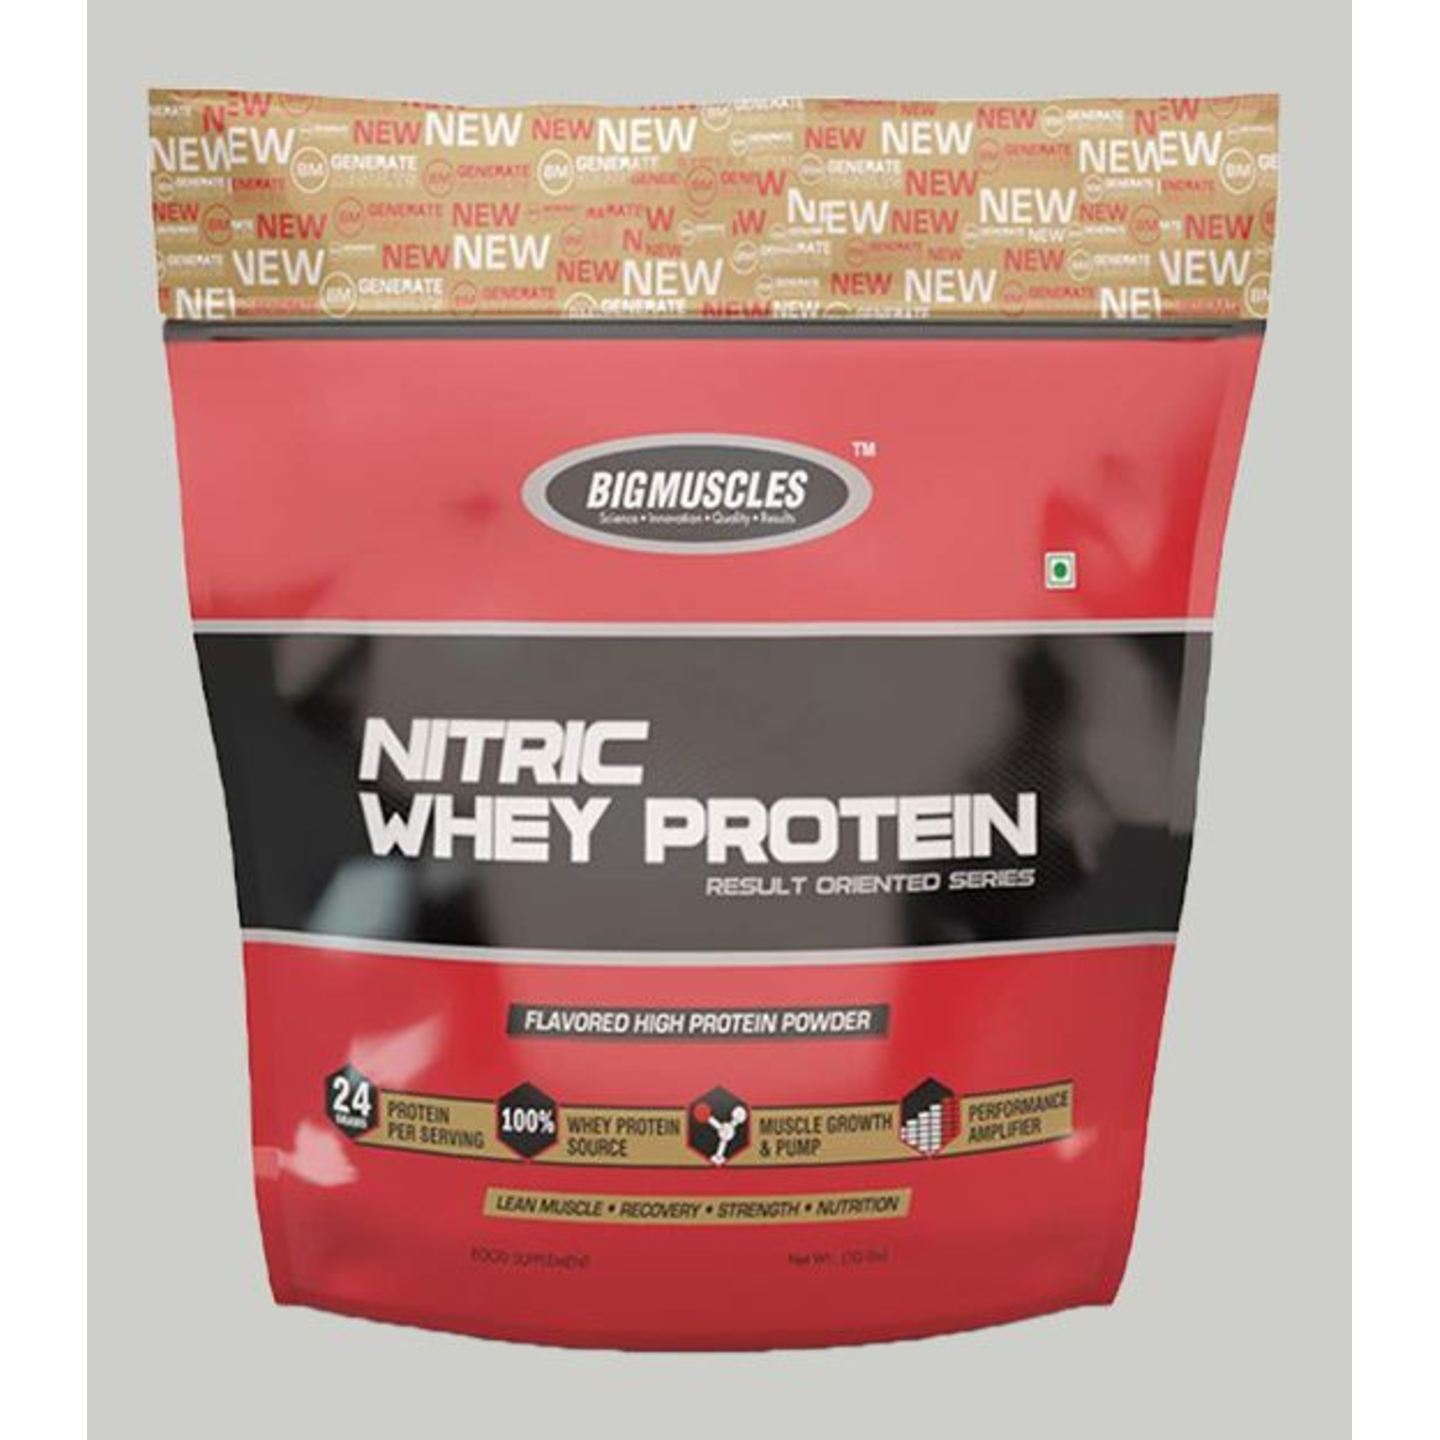 MastMart Bigmuscles Nutrition Nitric Whey Protein Rich Chocolate 10 lbs